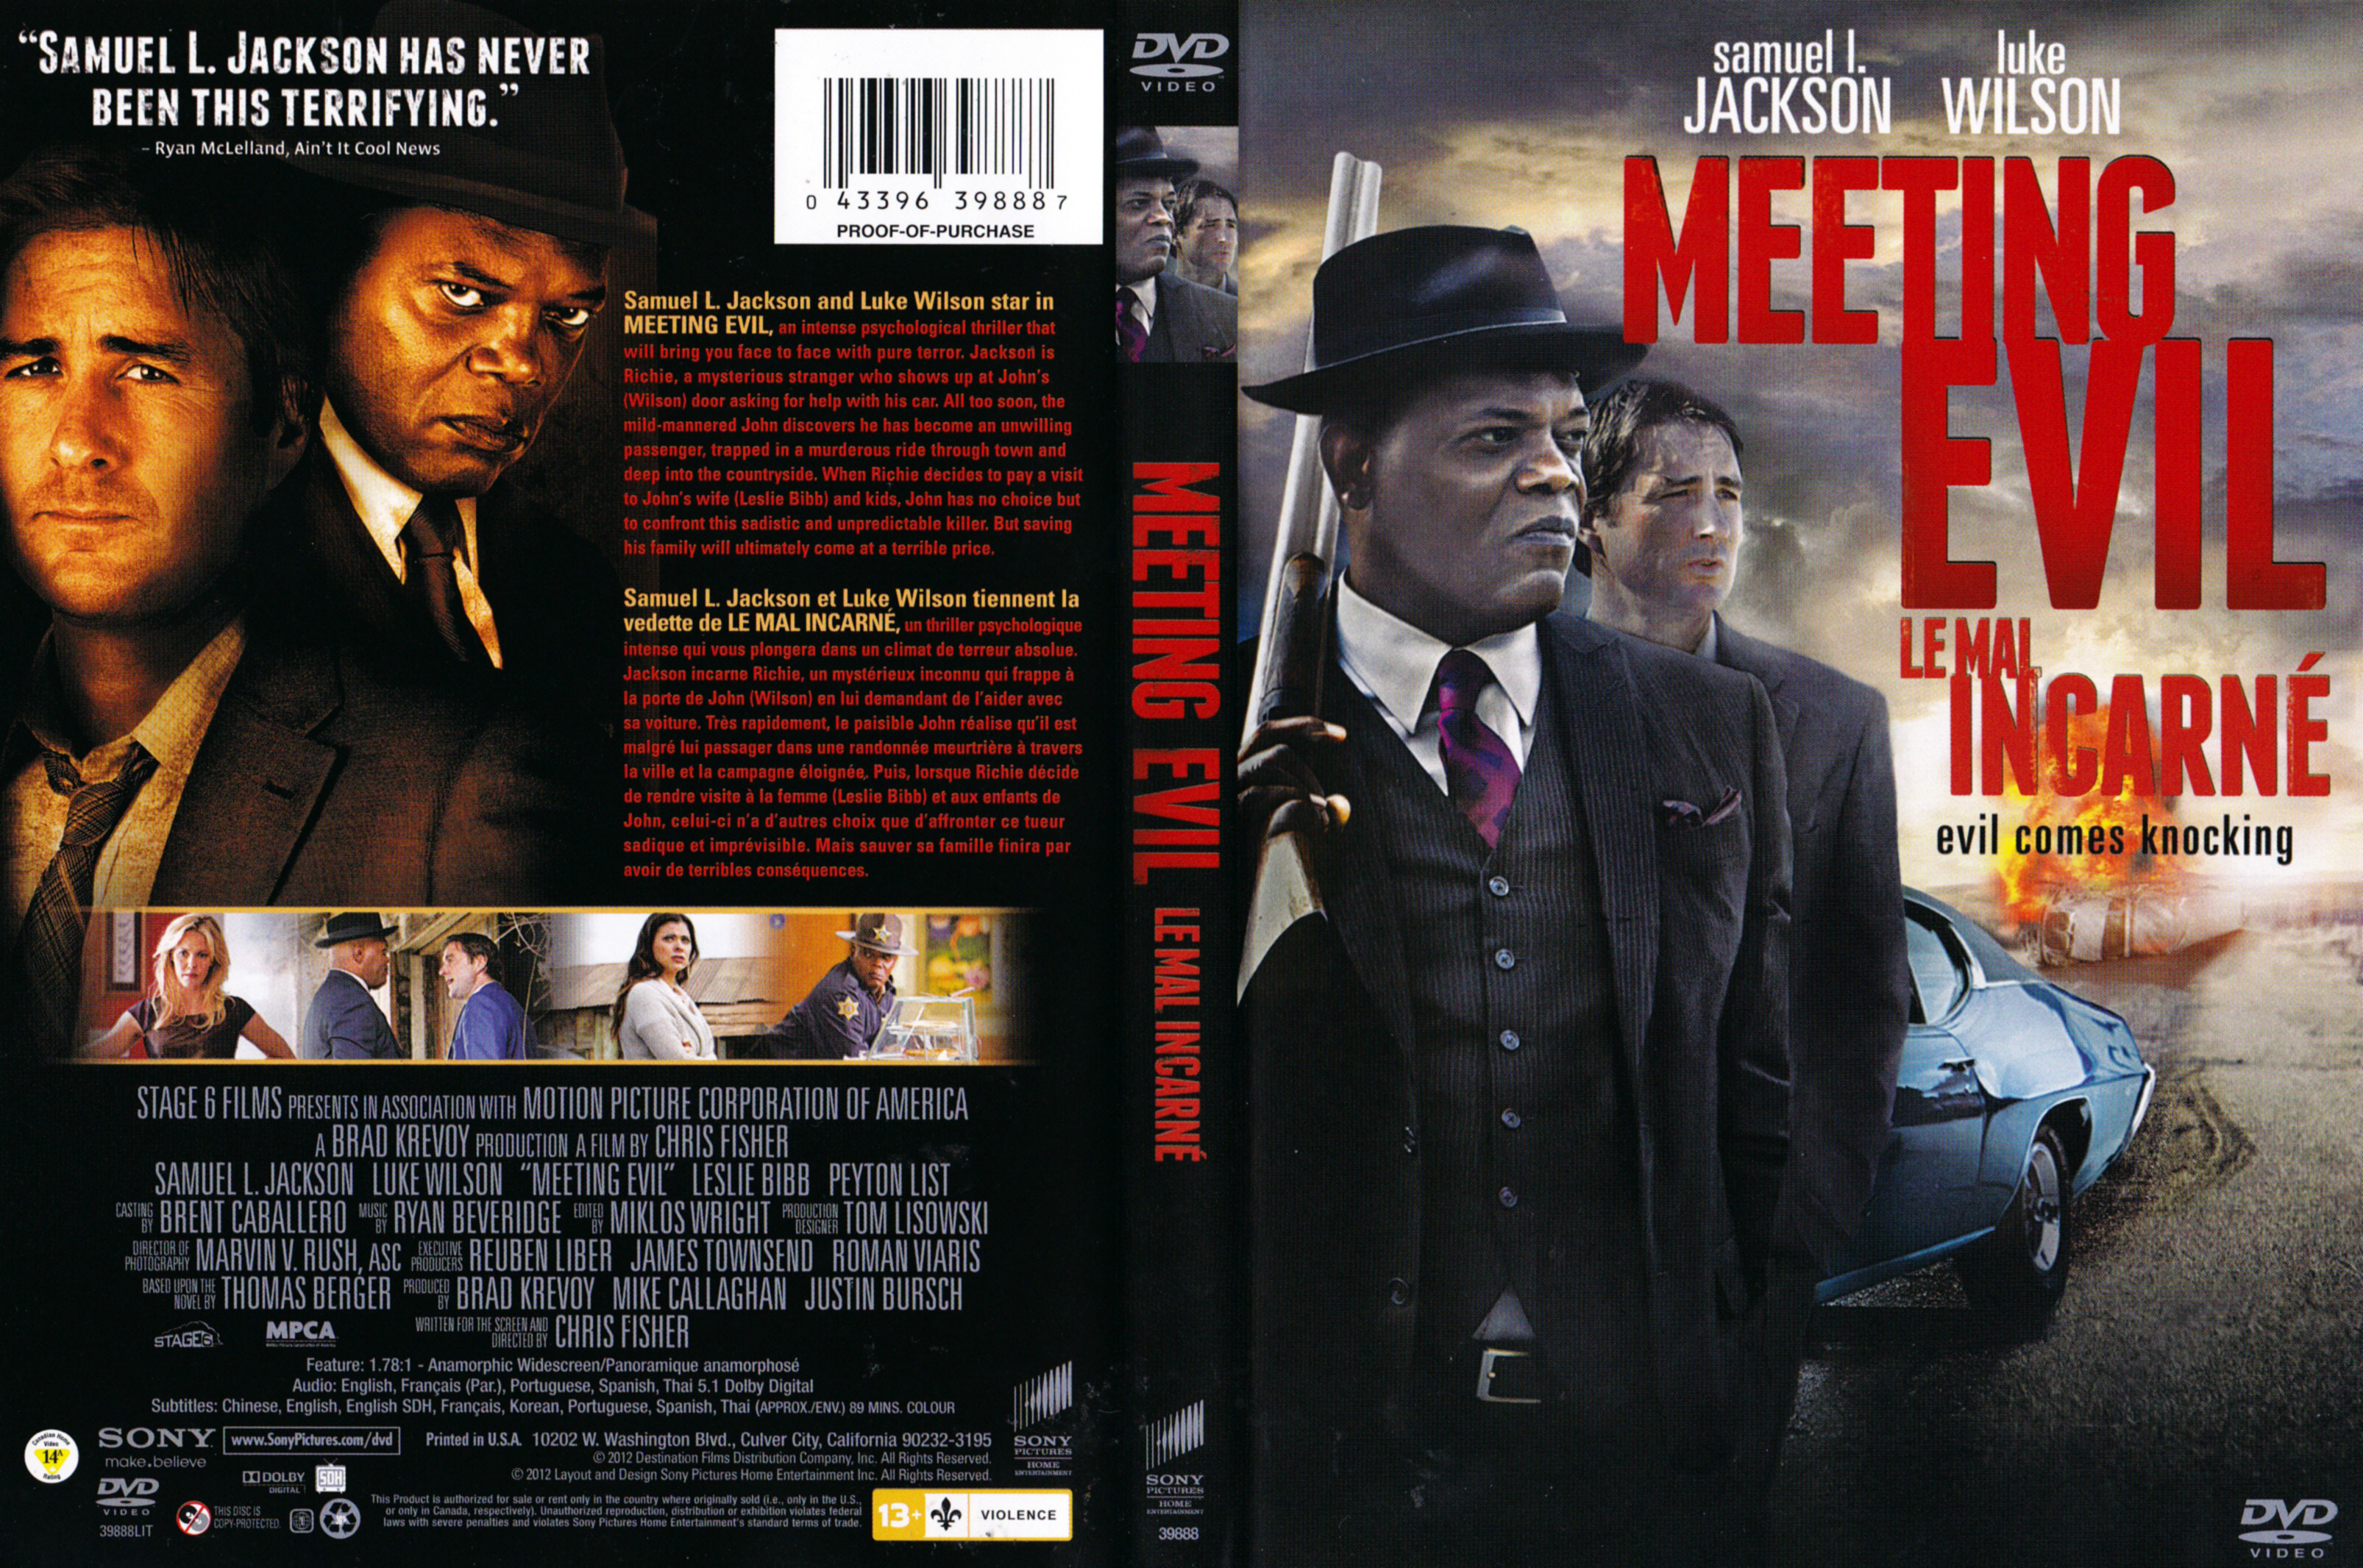 Jaquette DVD Meeting evil - Le mal incarn (Canadienne)